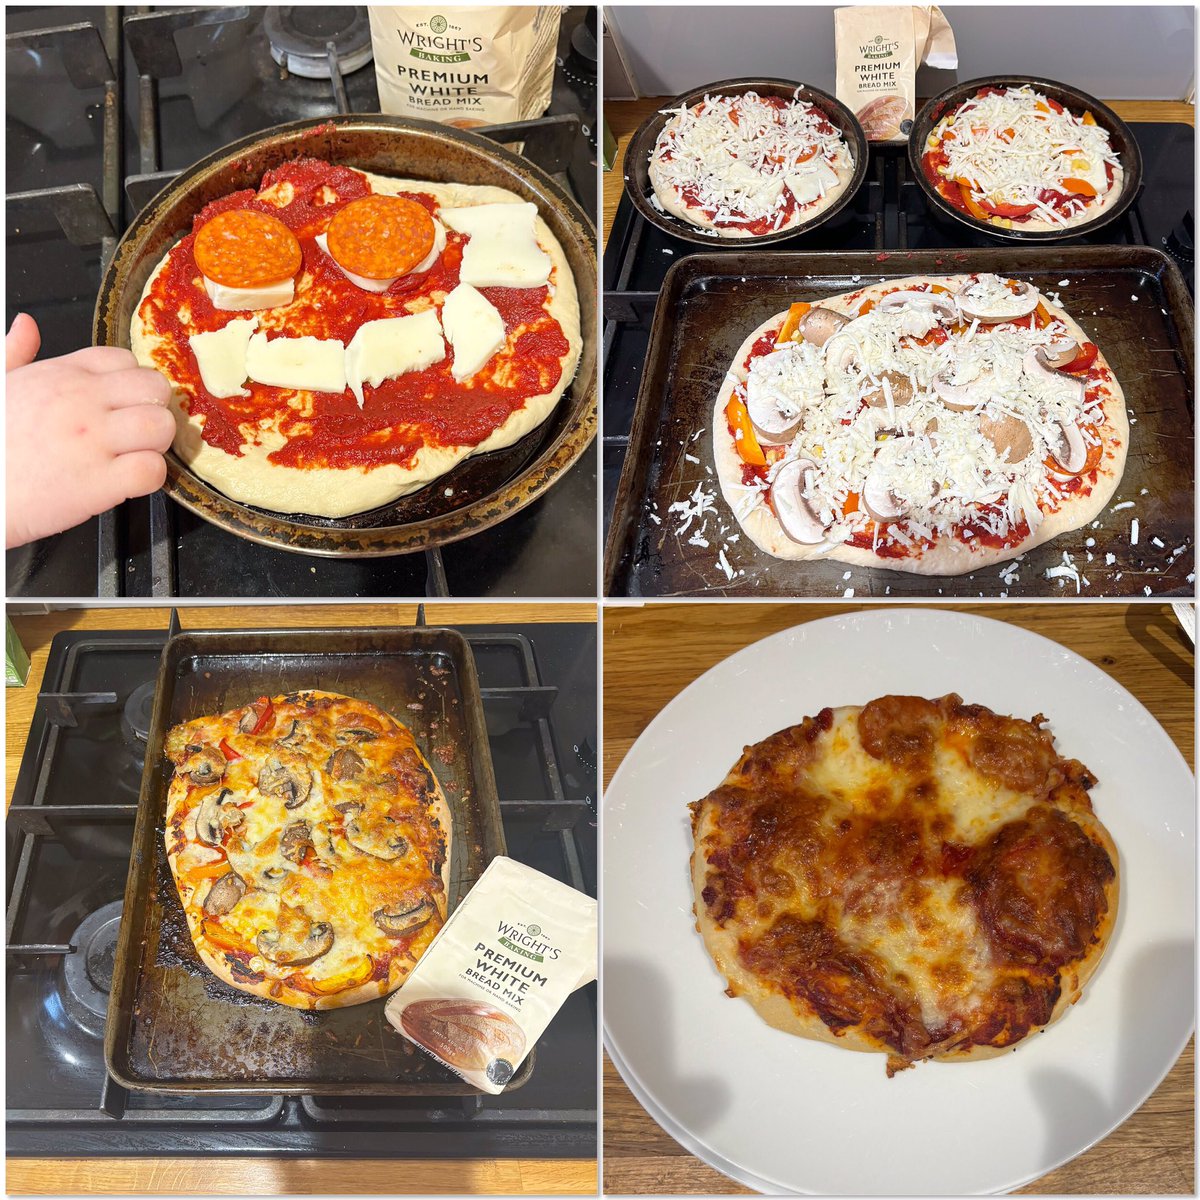 A fun pizza night with @Wrightsbaking Premium White Bread Mix & my little helper. Smiley face for the helper who also made our mushroom & pepperoni pizza with a veggie option for D2. Absolutely delicious ❤️❤️❤️ #thursdaymorning #pizza